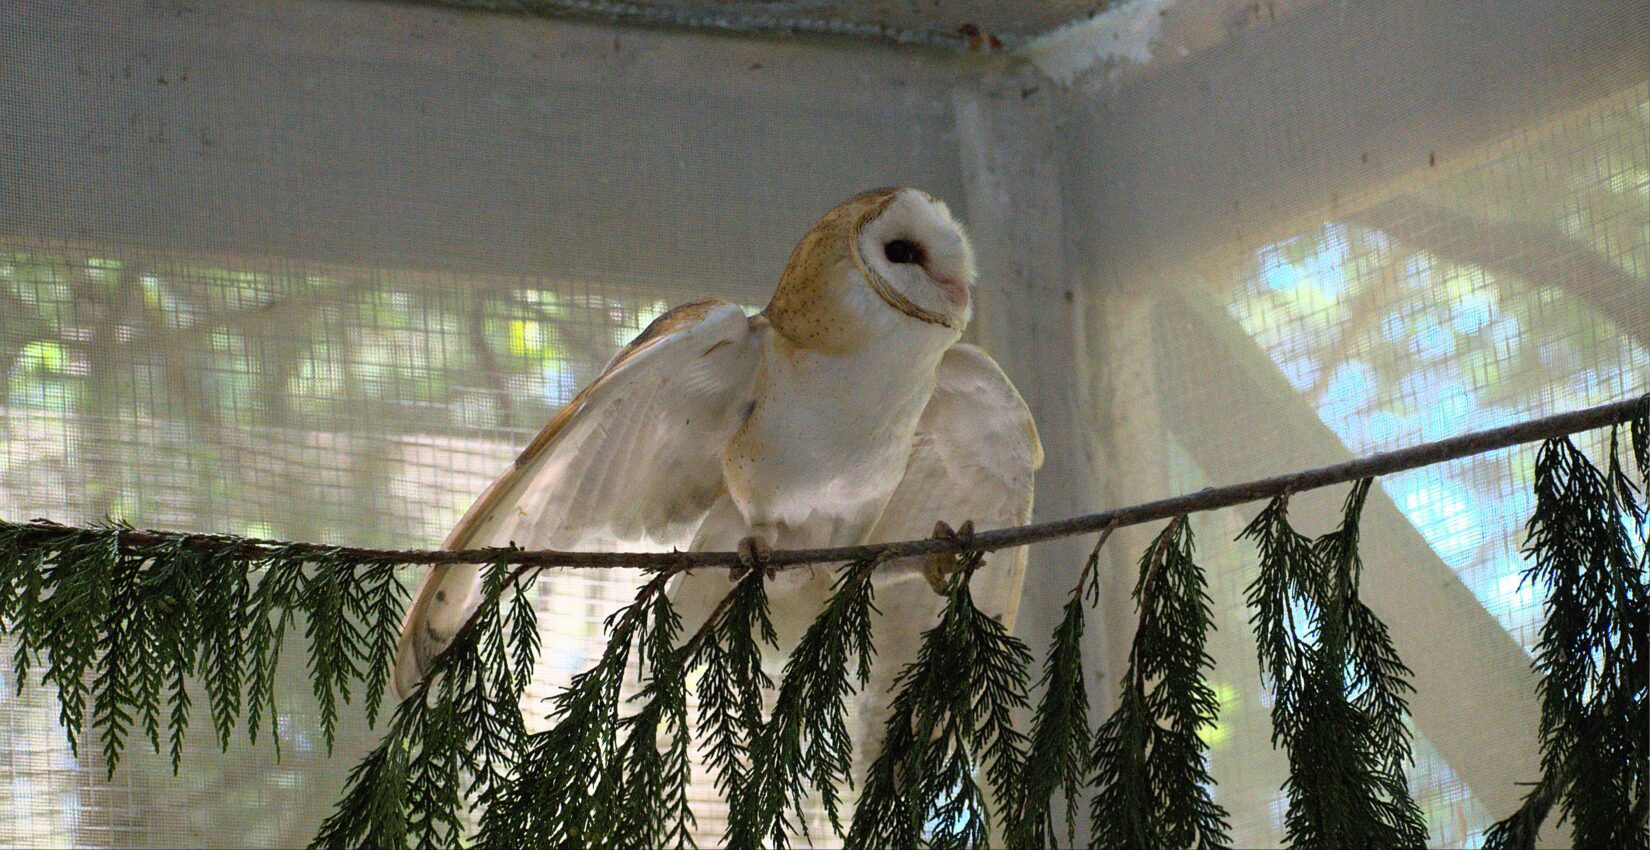 Barn owl perched on a cedar branch with wings spread out